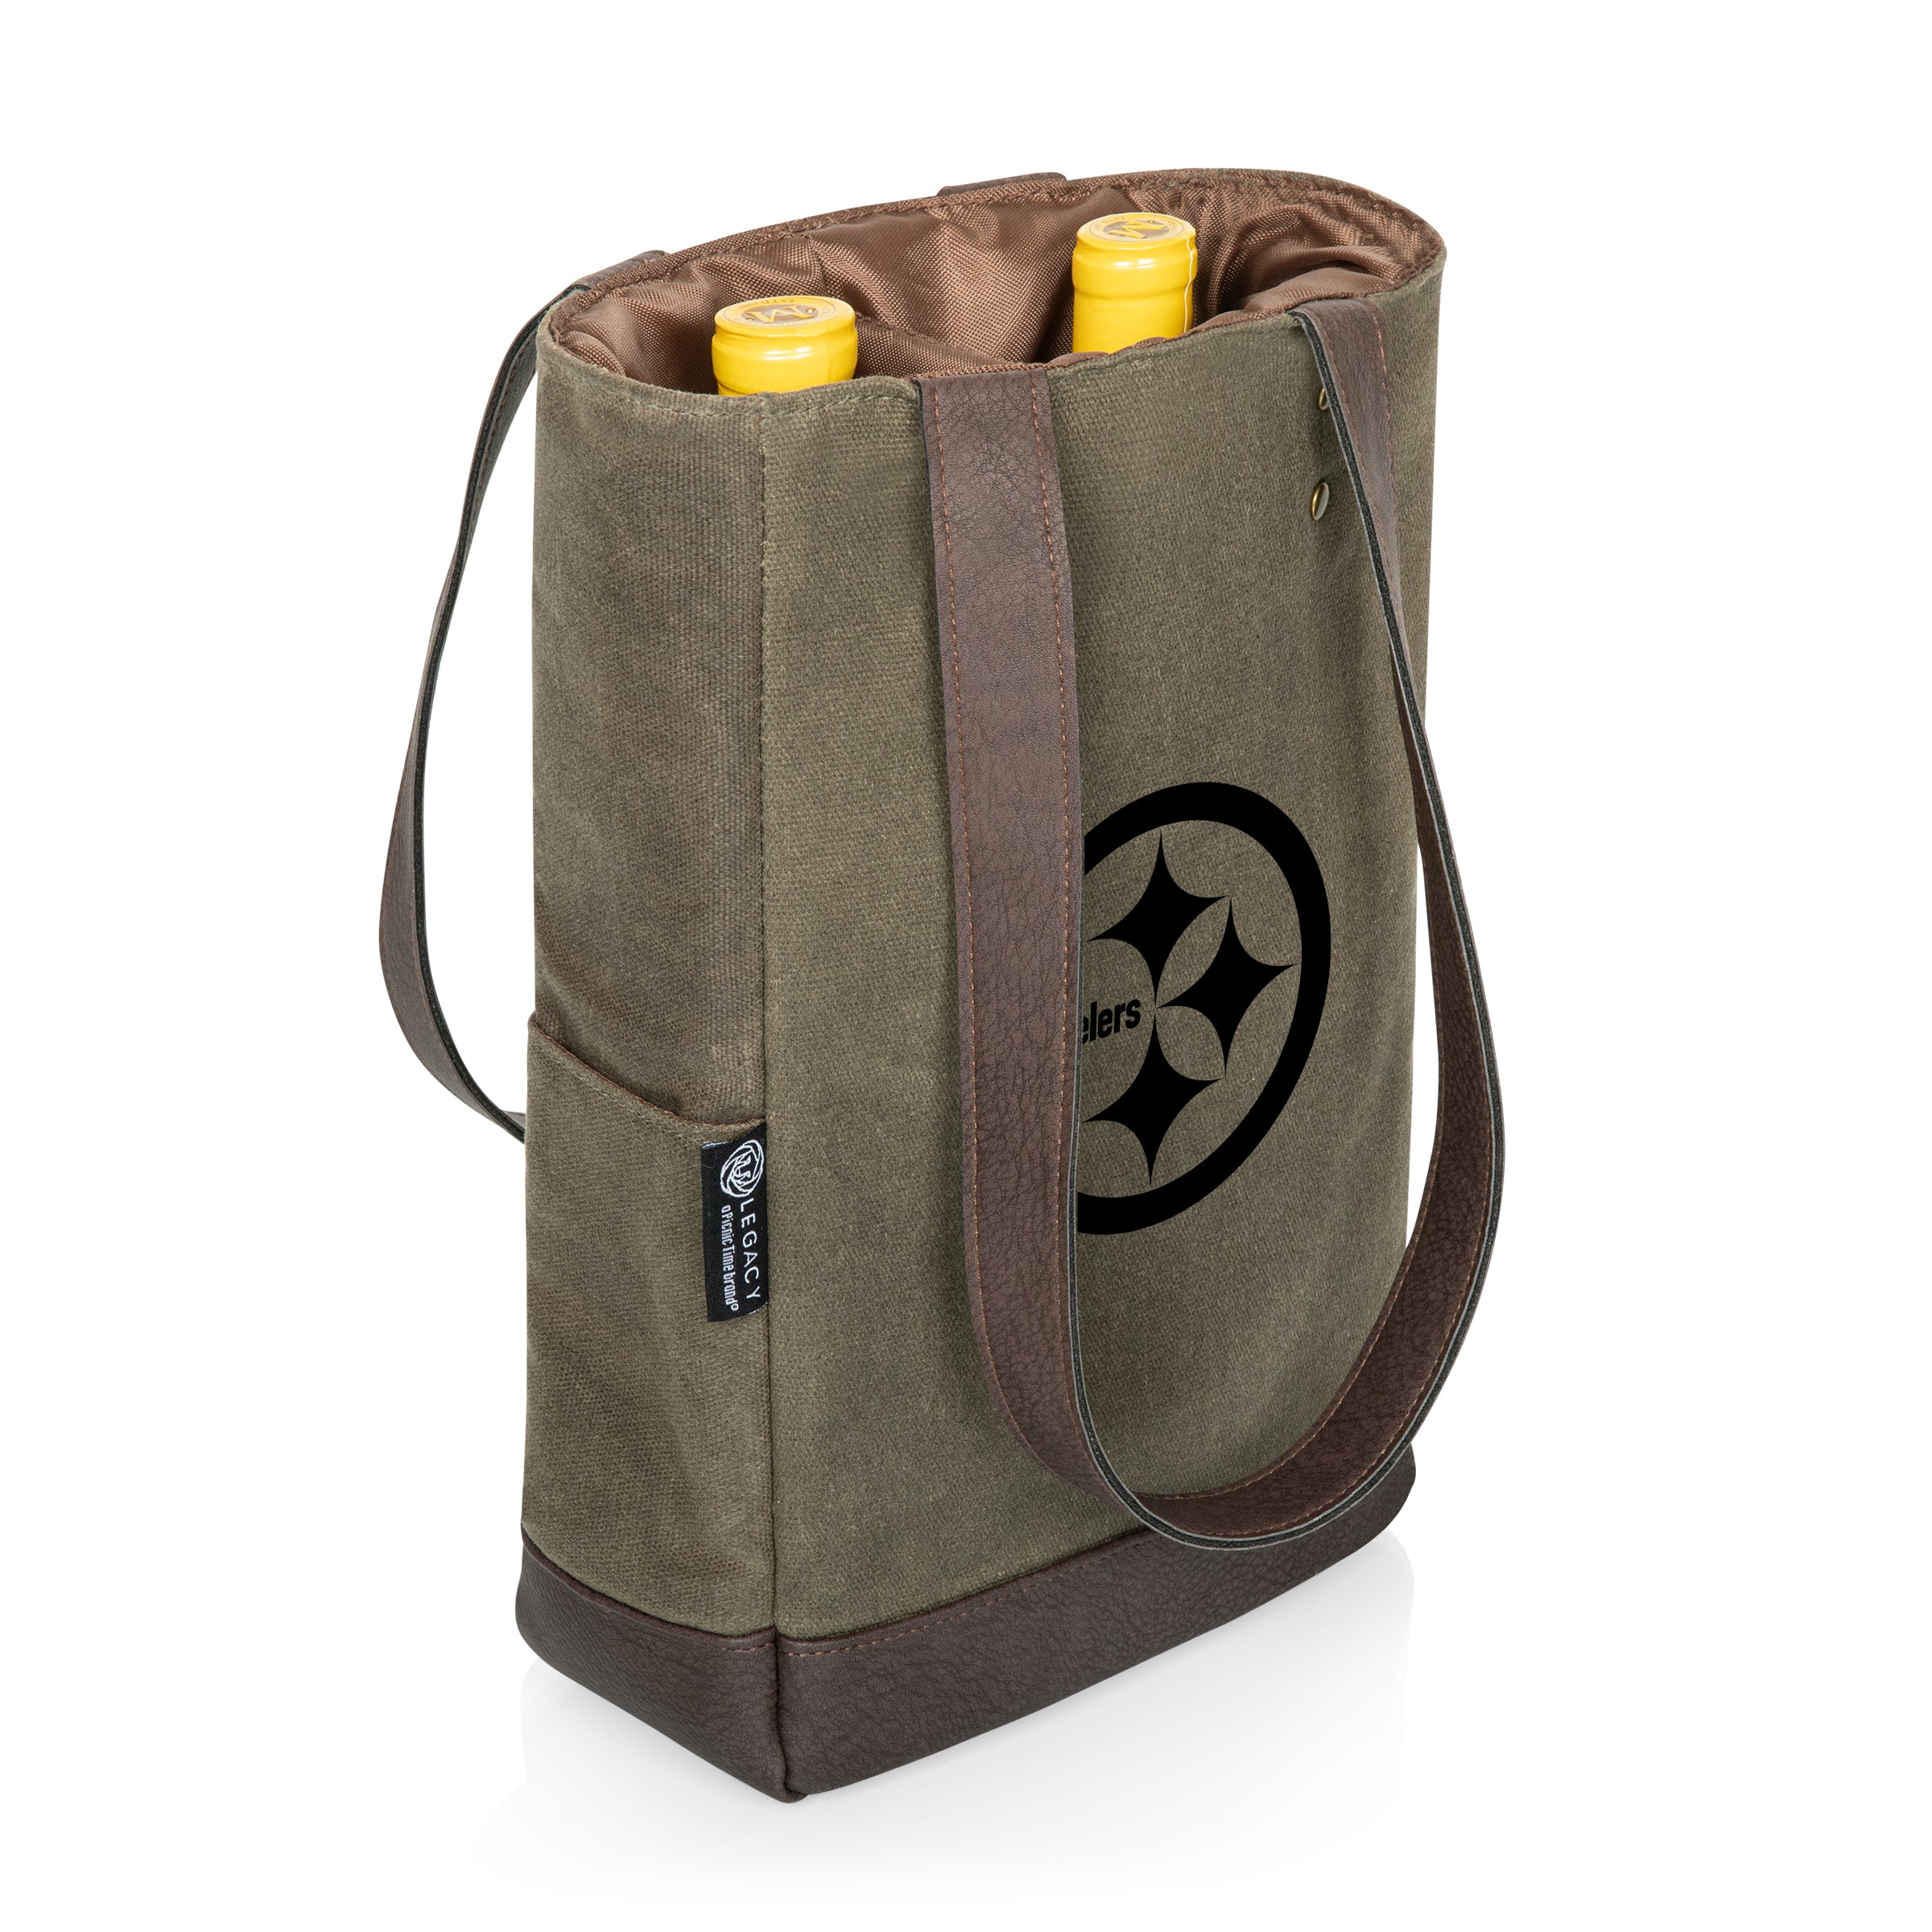 Pittsburgh Steelers - 2 Bottle Insulated Wine Cooler Bag